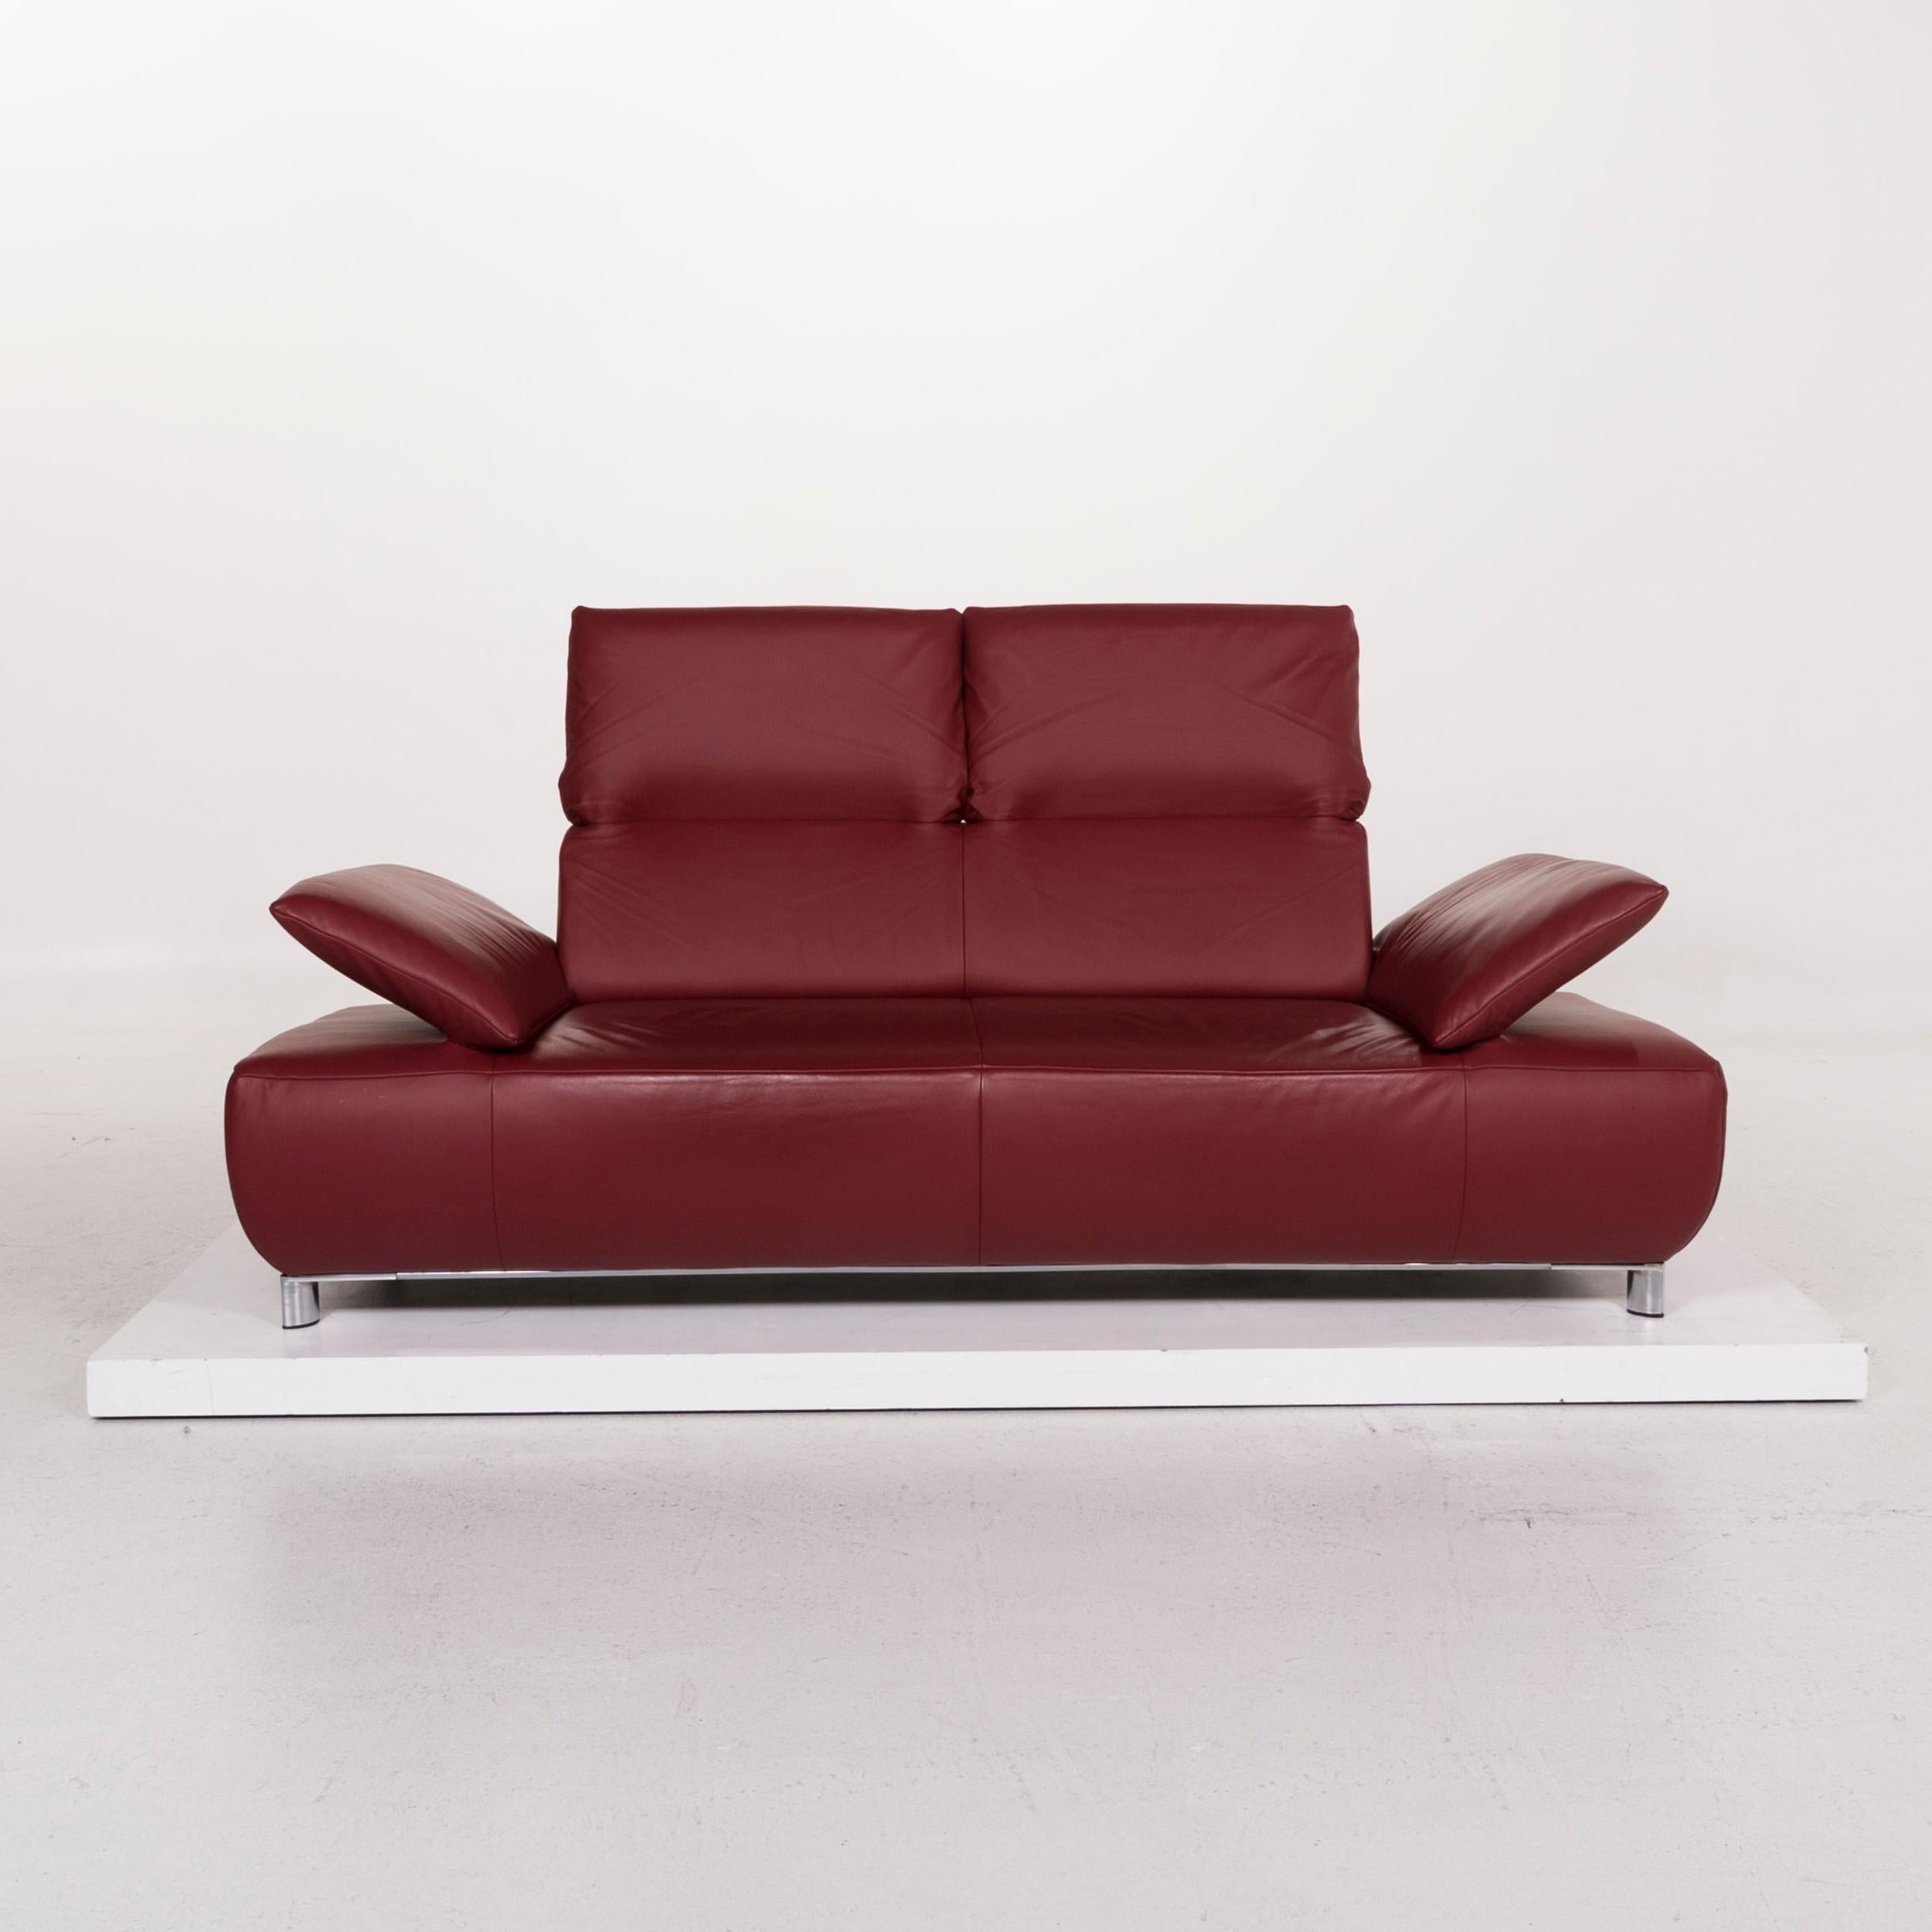 We bring to you a Koinor Volare leather sofa red two-seat function couch.

 

 Product measurements in centimeters:
 

Depth 90
Width 213
Height 72
Seat-height 42
Rest-height 52
Seat-depth 54
Seat-width 133
Back-height 38.